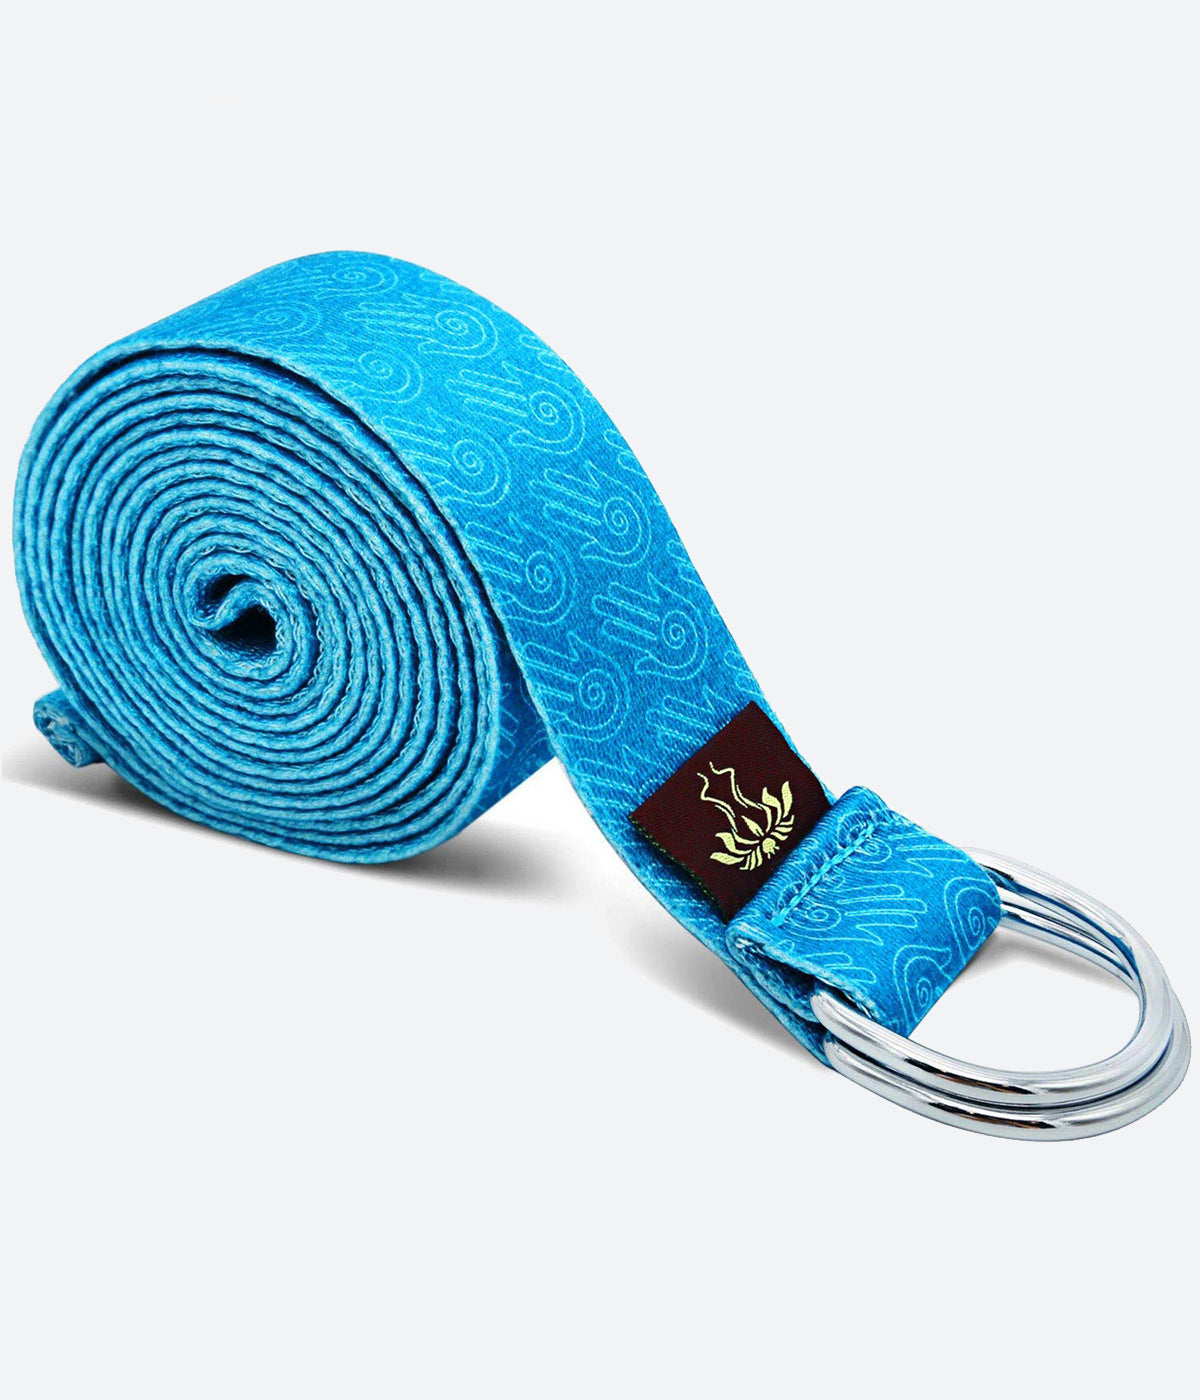 Heathyoga Yoga Strap Made from Durable Cotton with Adjustable D